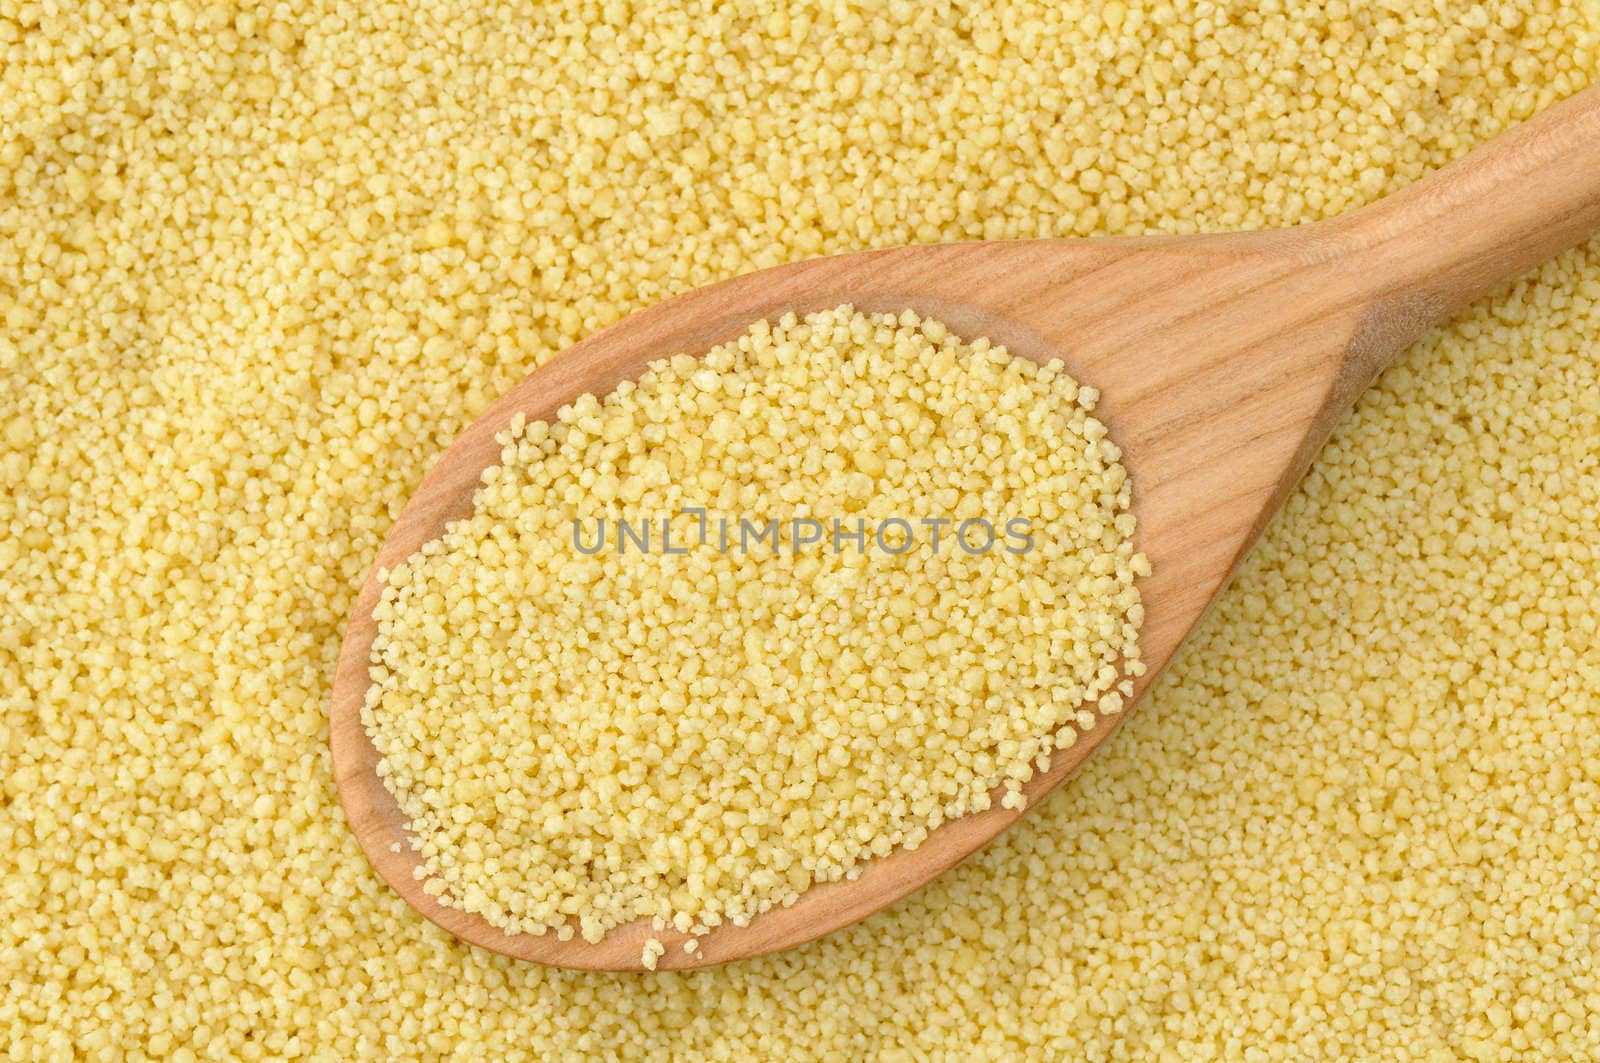 Wheat semolina couscous background with wooden spoon